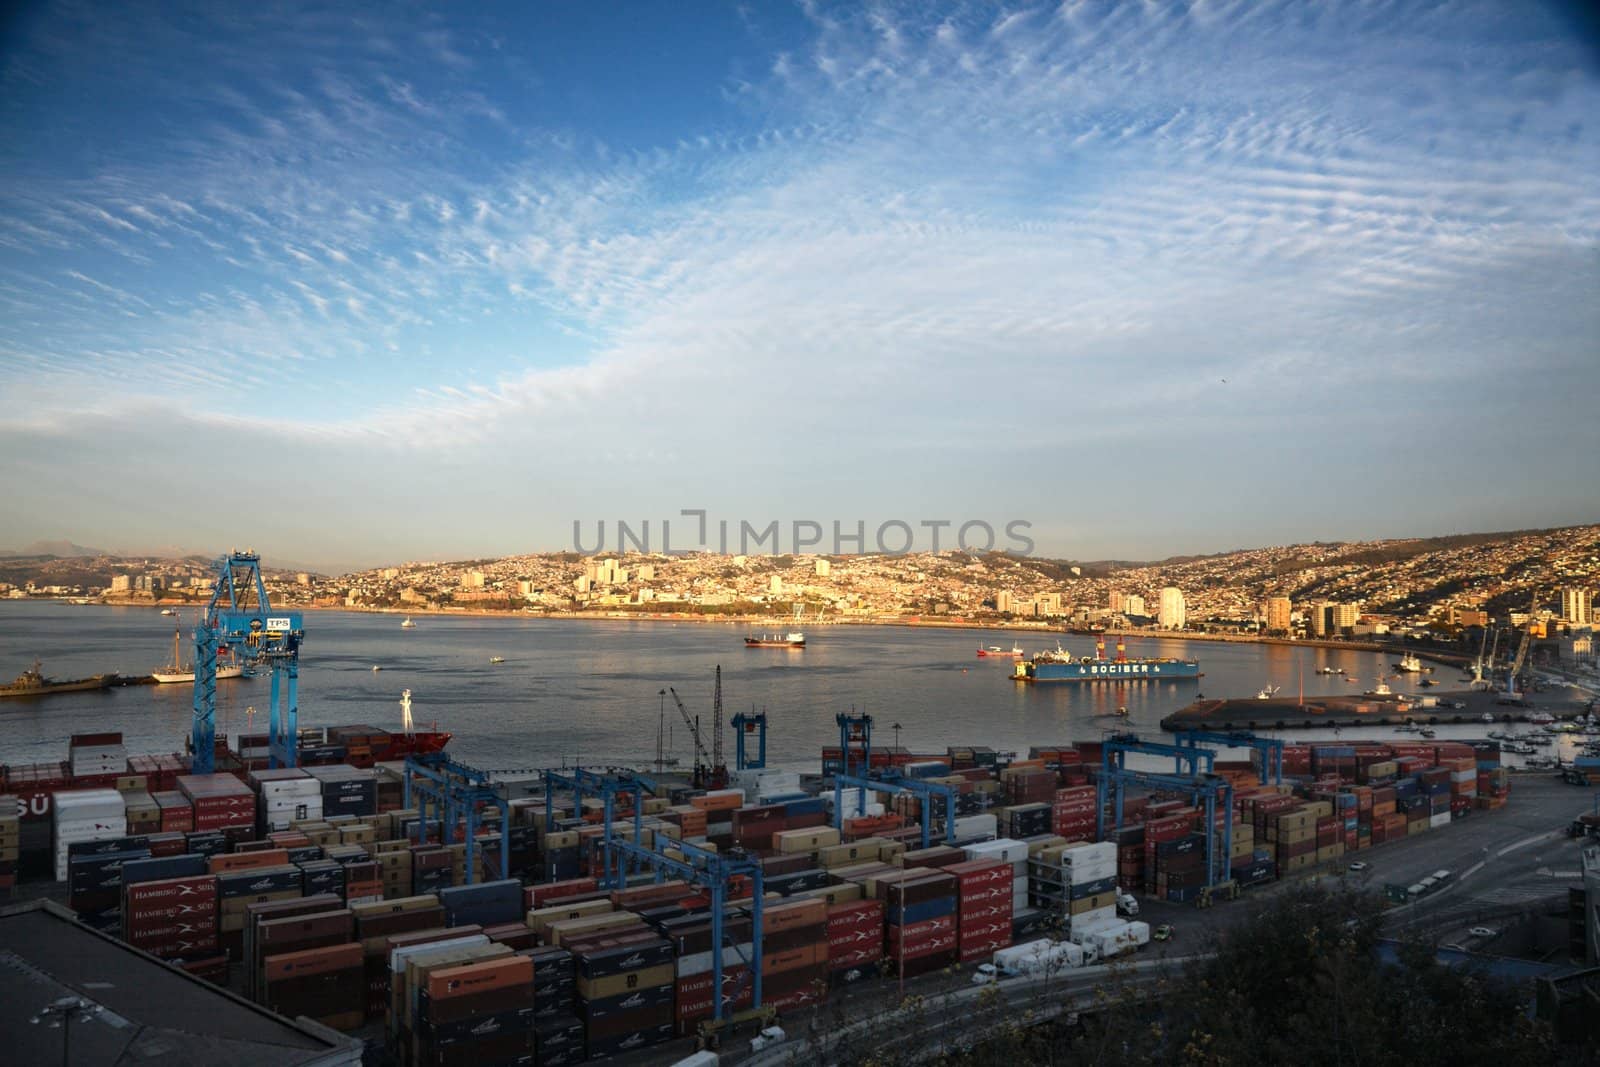 VALPARAISO, CHILE - AUGUST 9: View on the one of the chilean most important seaports on August 9, 2010 in Valparaiso, Chile